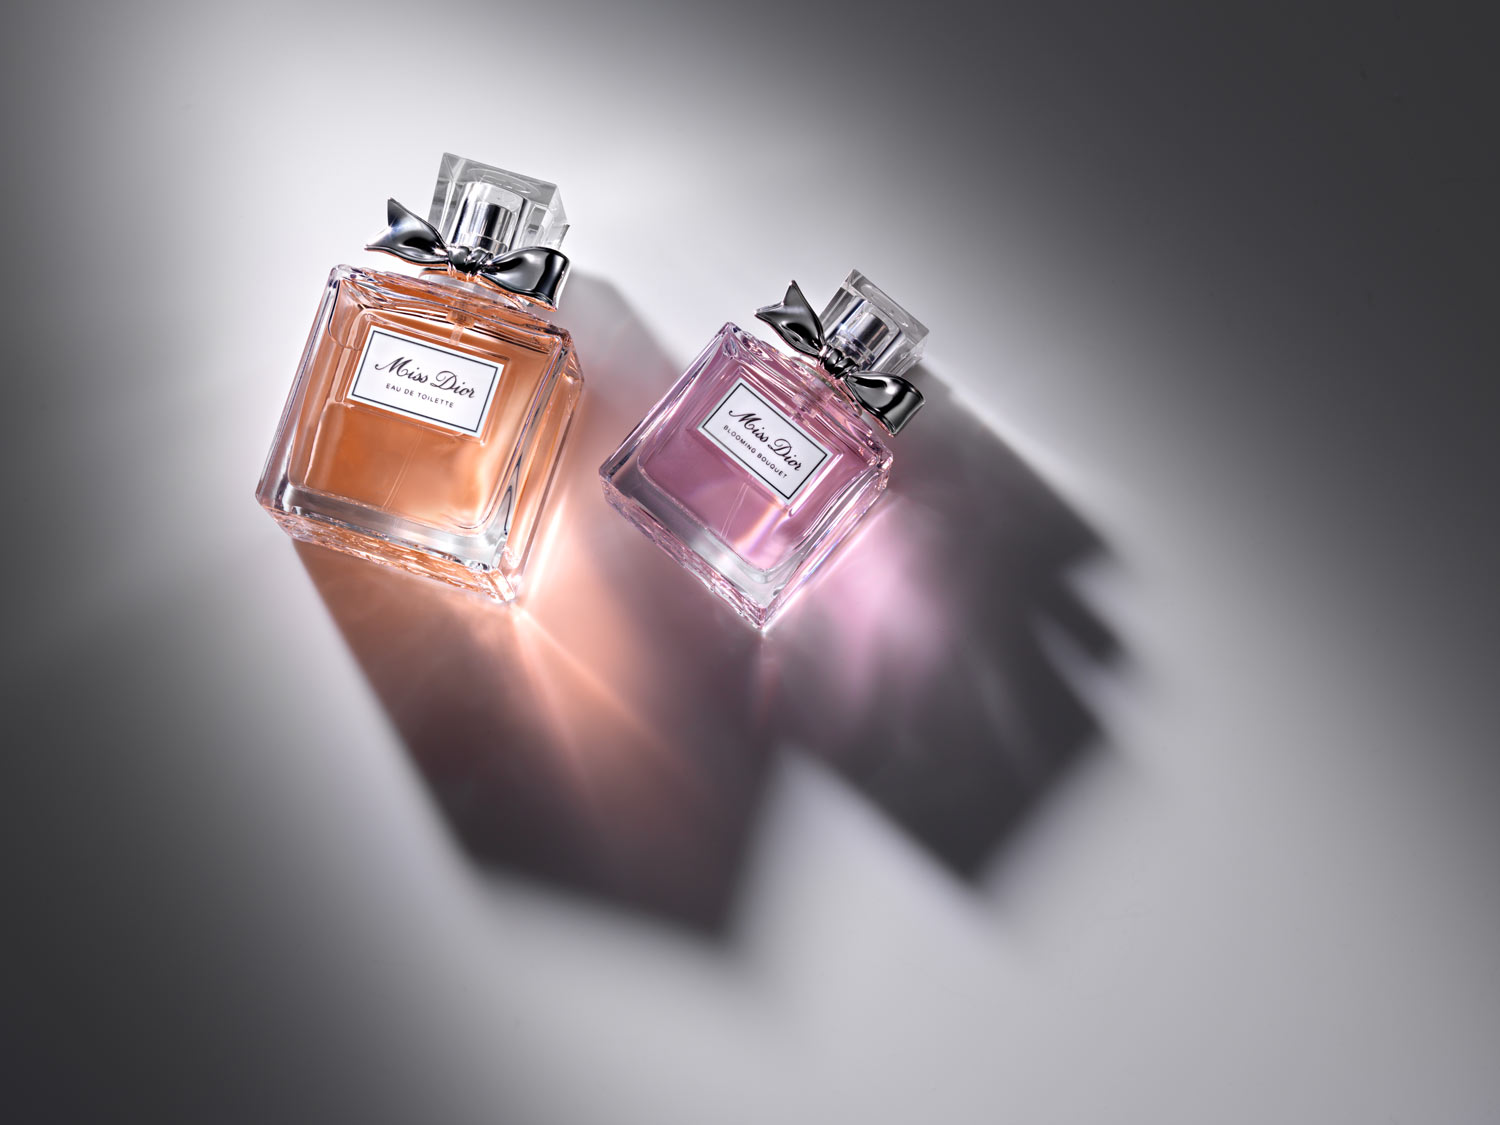 Dior perfume product photography by Karl Taylor